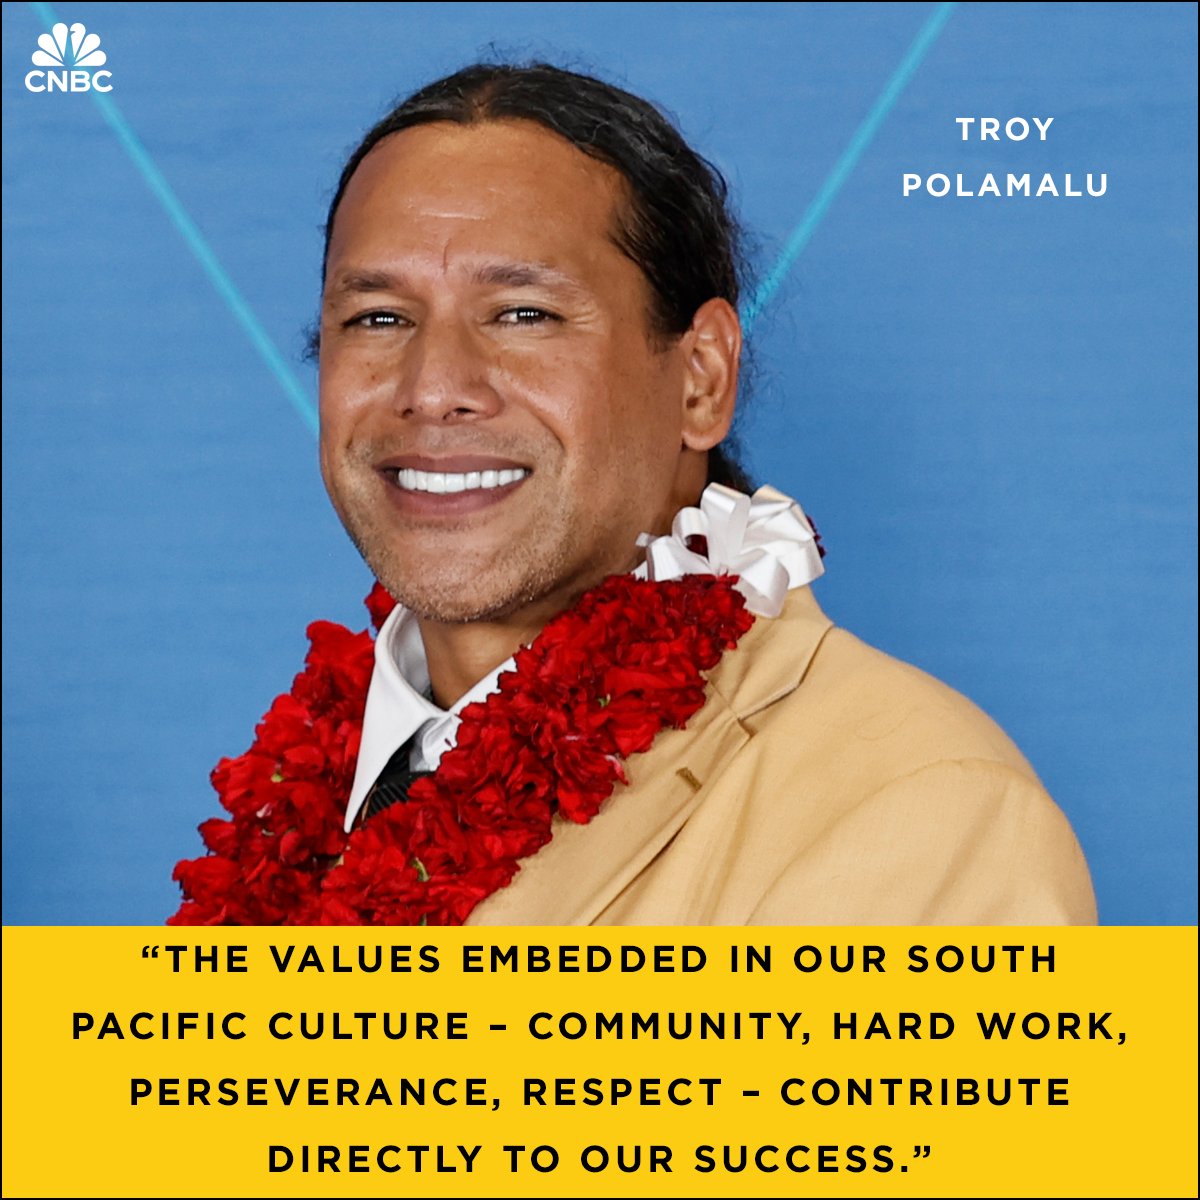 Former Pittsburgh @steelers safety @tpolamalu knows hard work and dedication lead to success.

#troypolamalu #aapiheritagemonth #steelers #successstory #cnbc